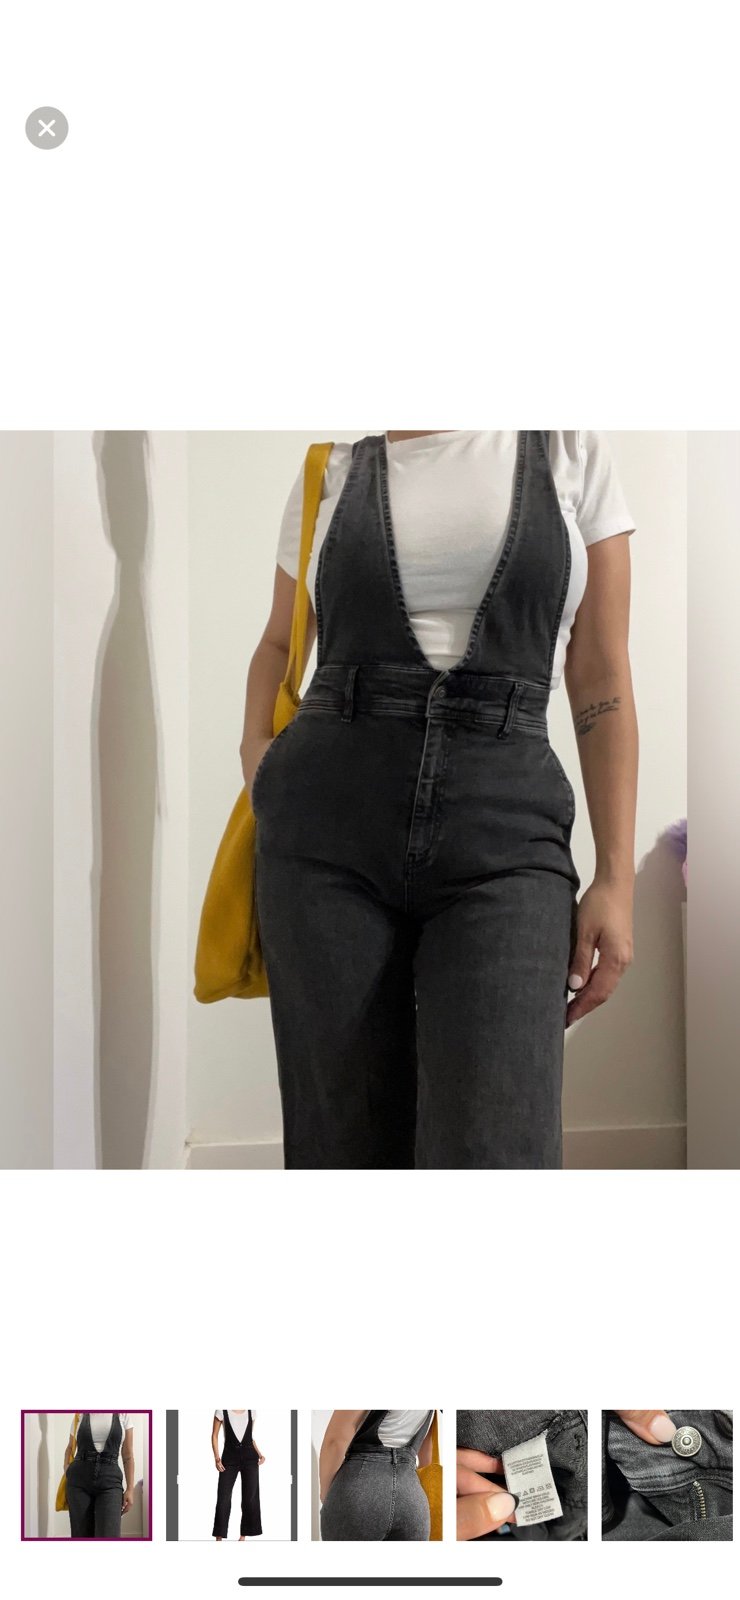 High quality Free people denim overalls size 6 PDdAjhSYD Cheap